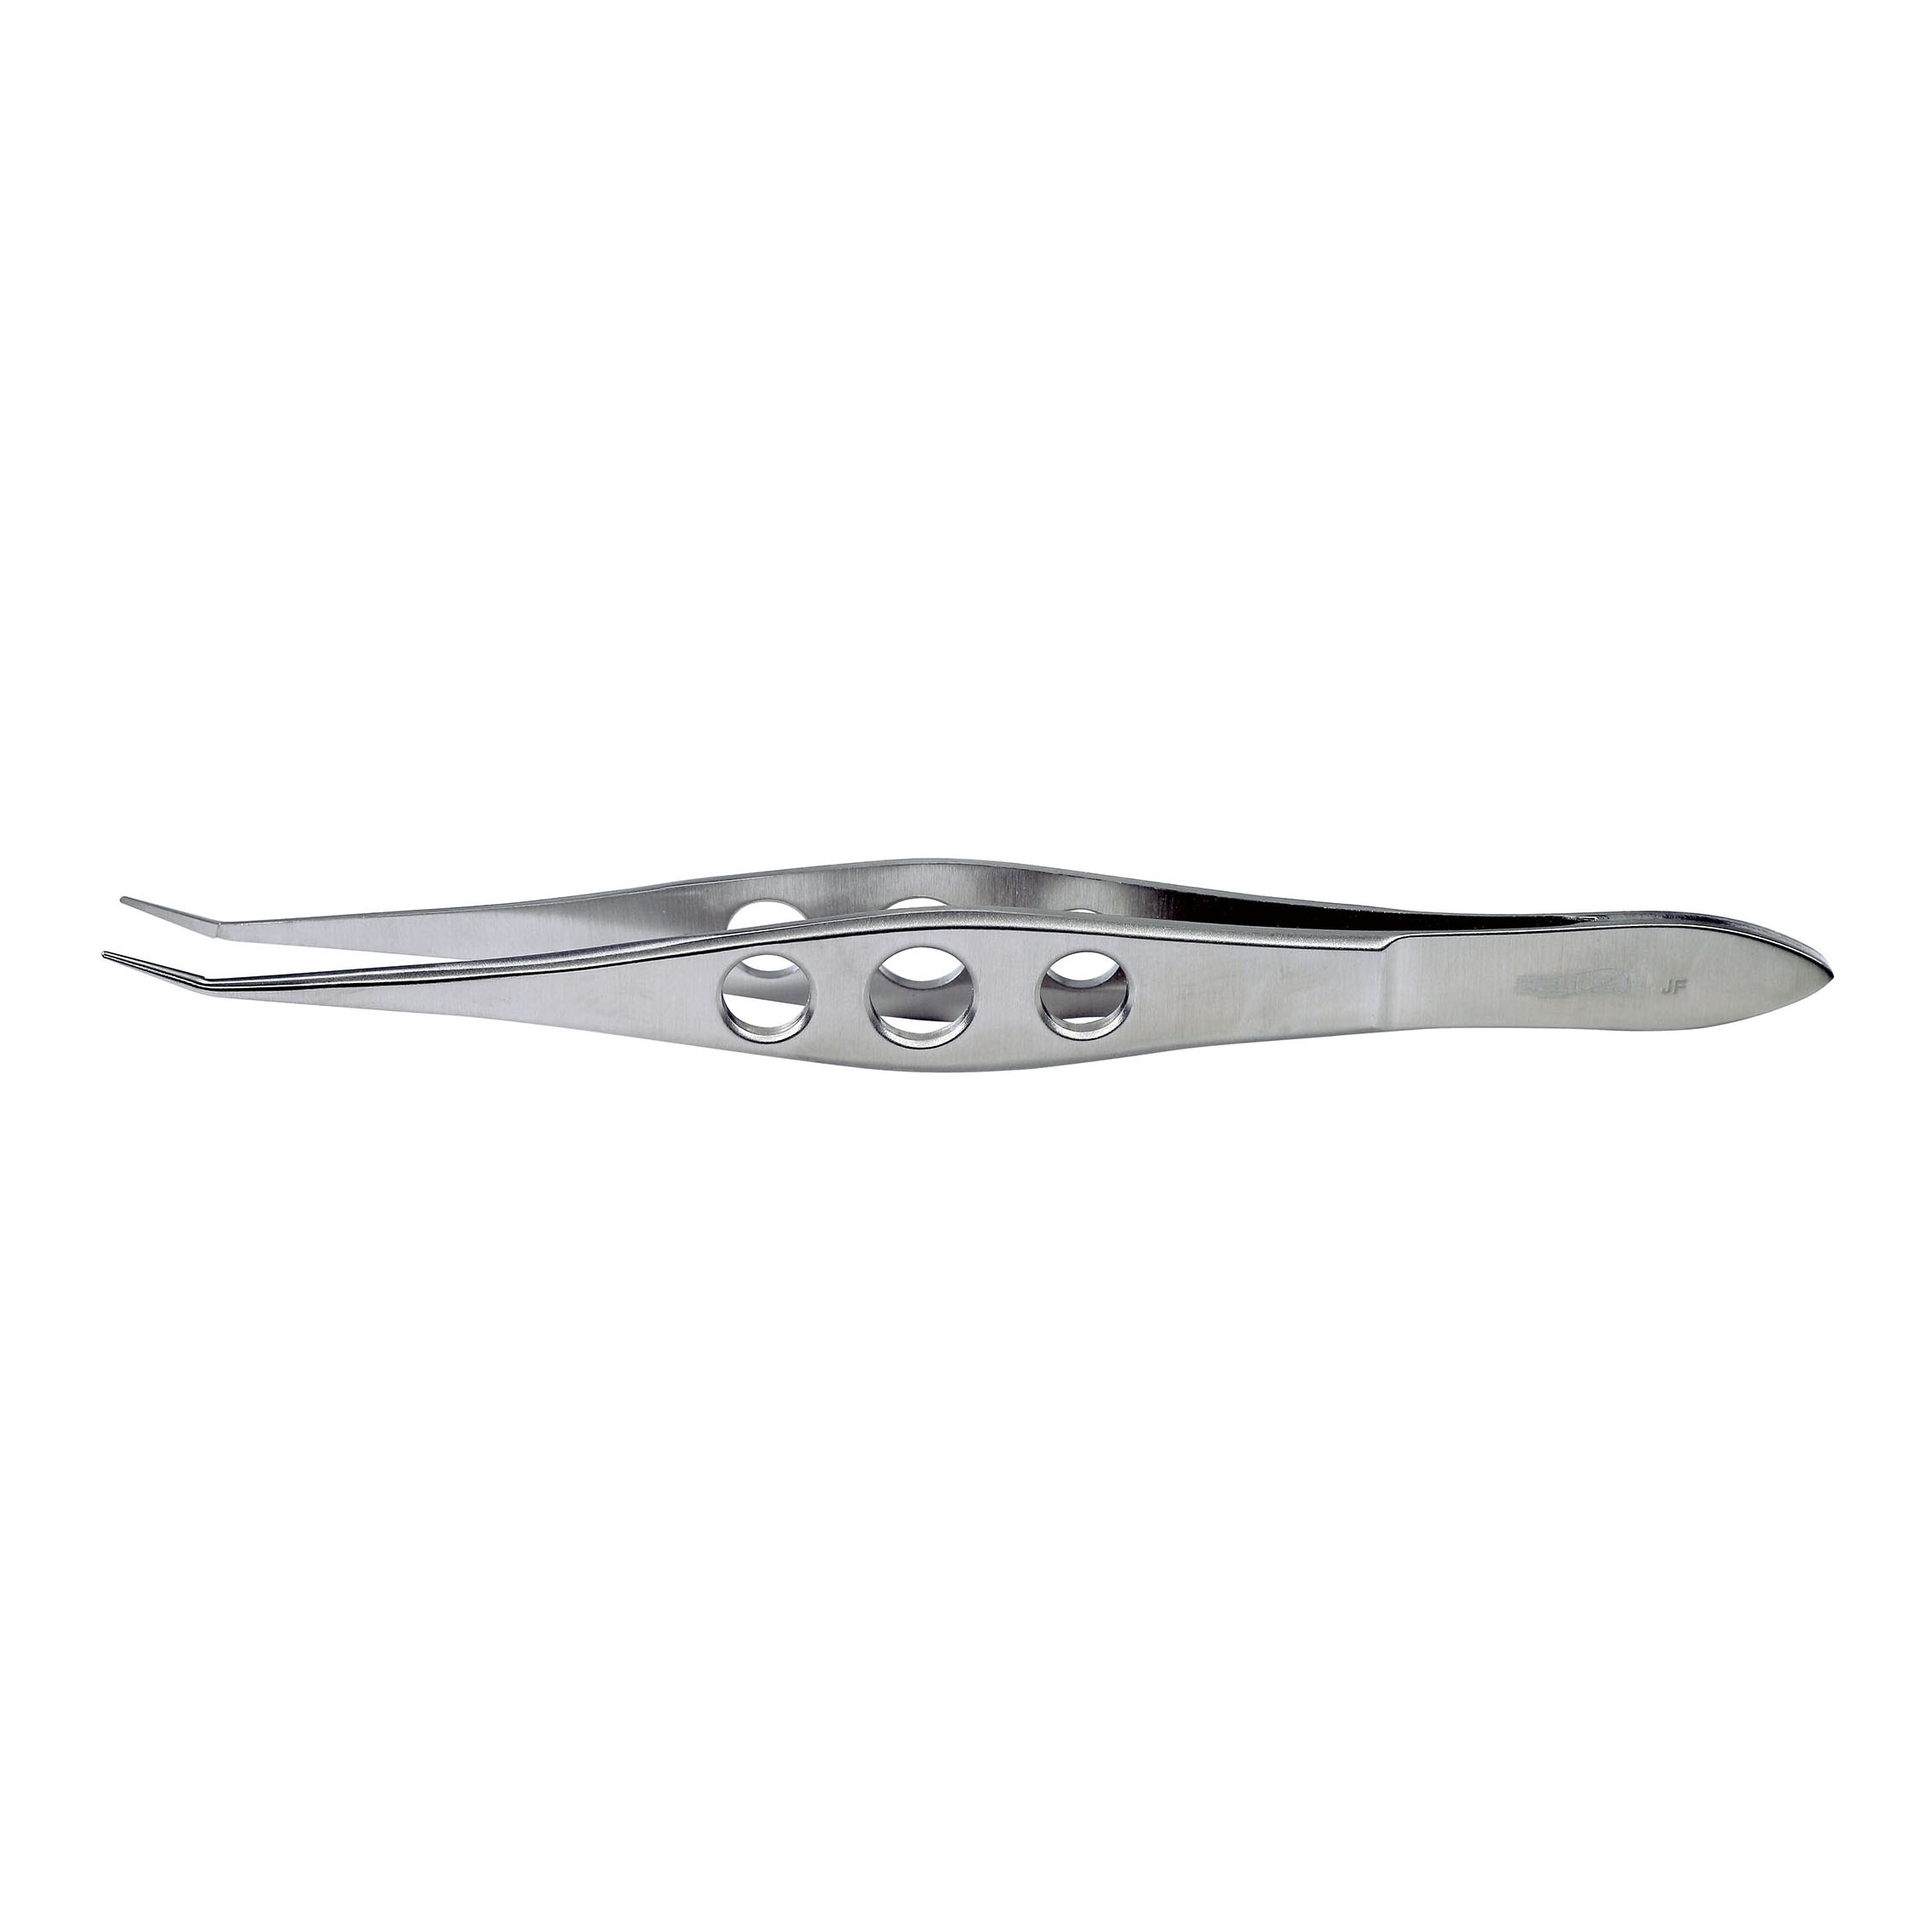 IF-4102 Stainless Steel Cilia Forceps